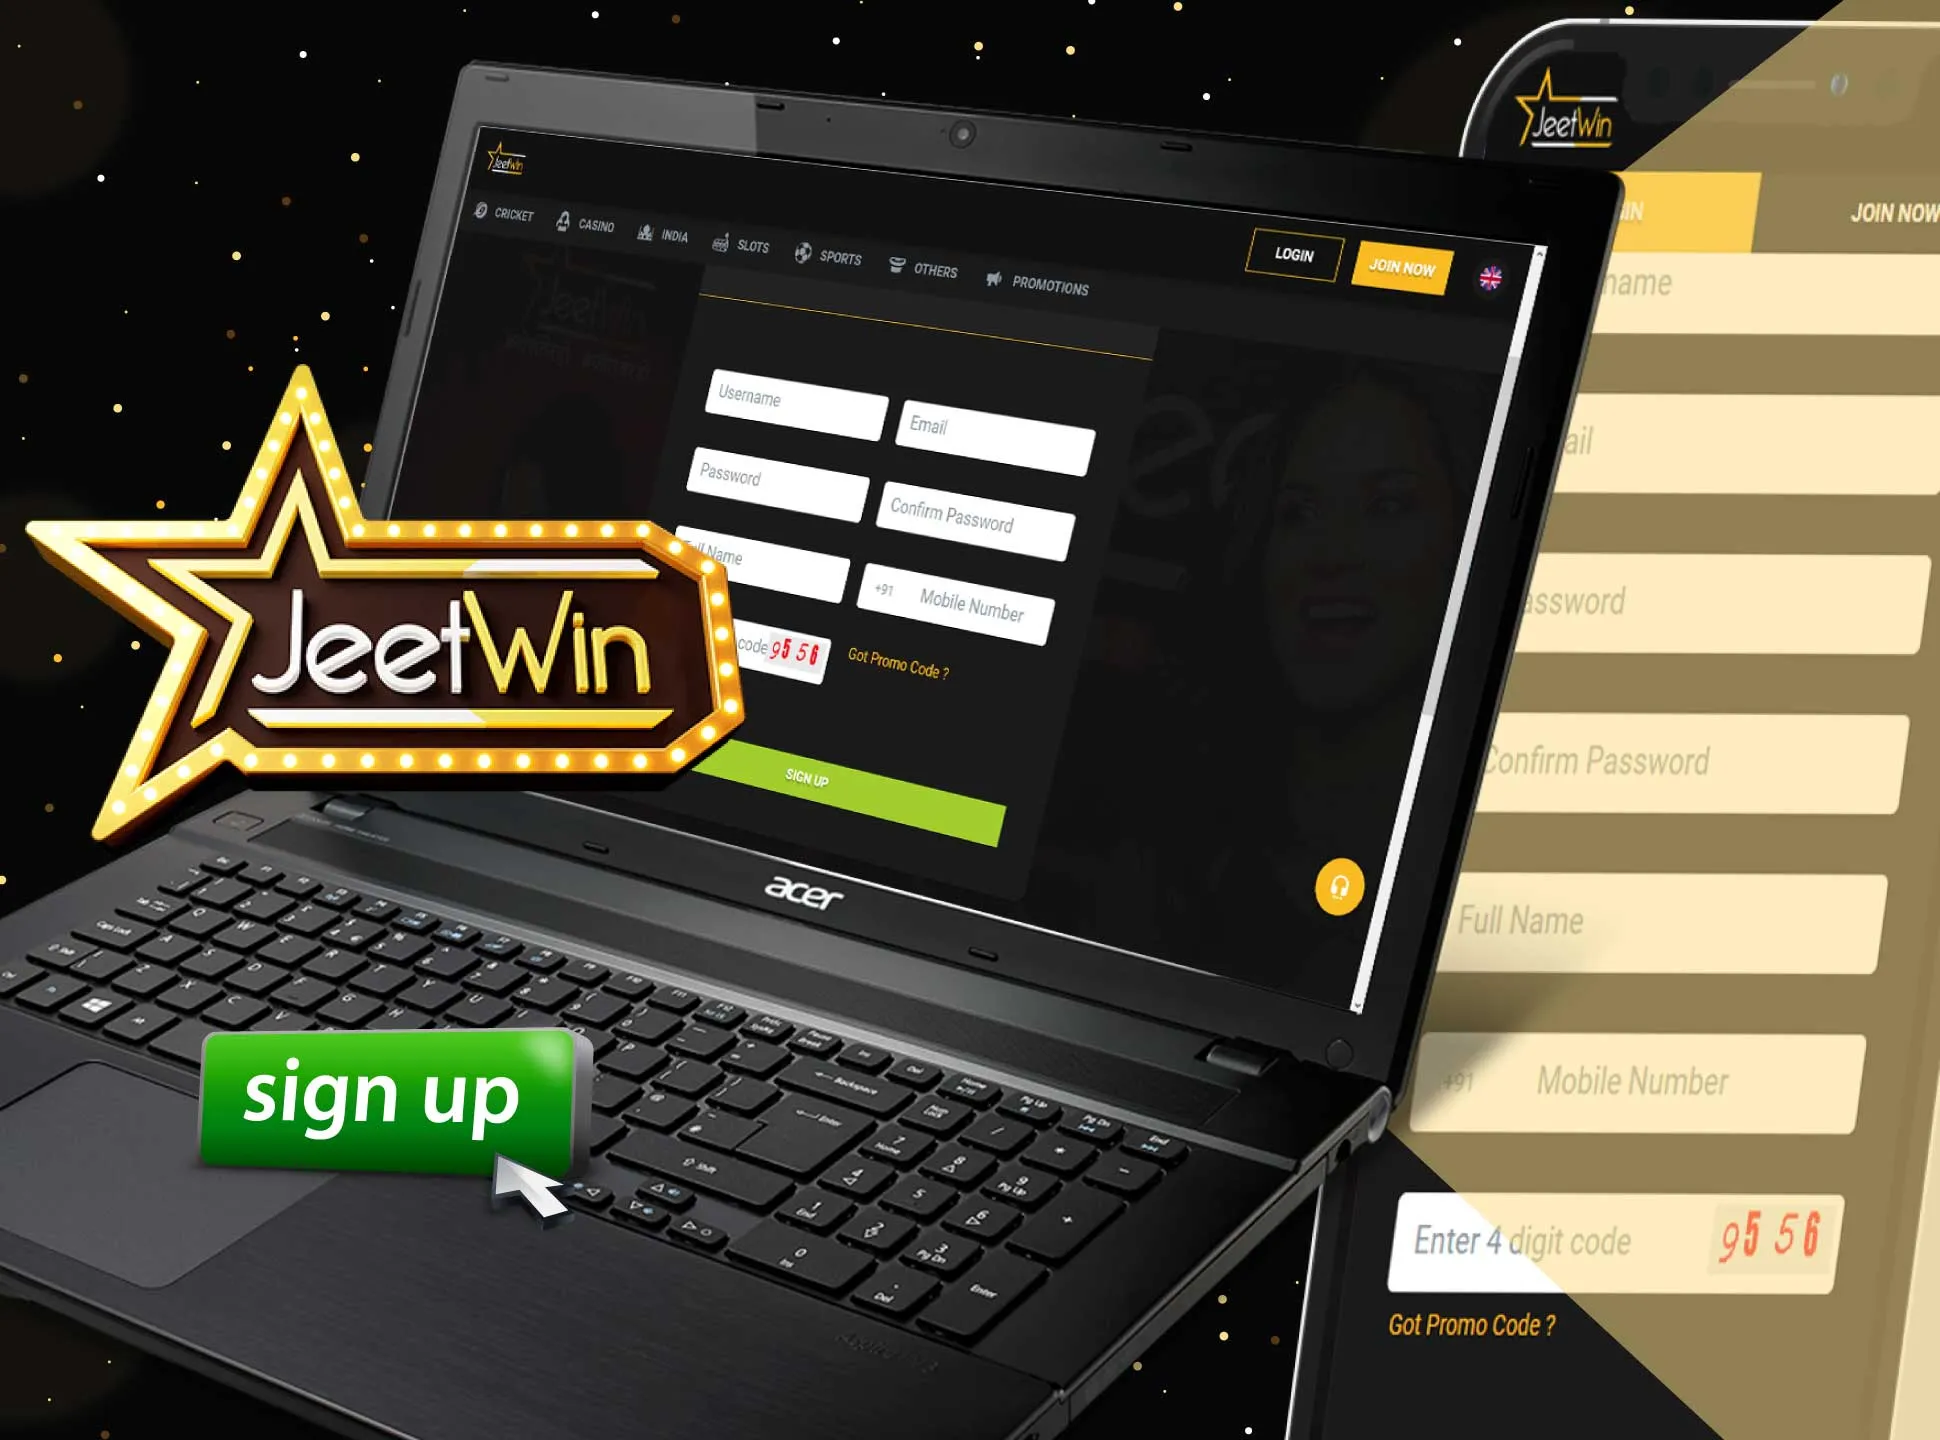 Sign up for Jeetwin and start betting on money.